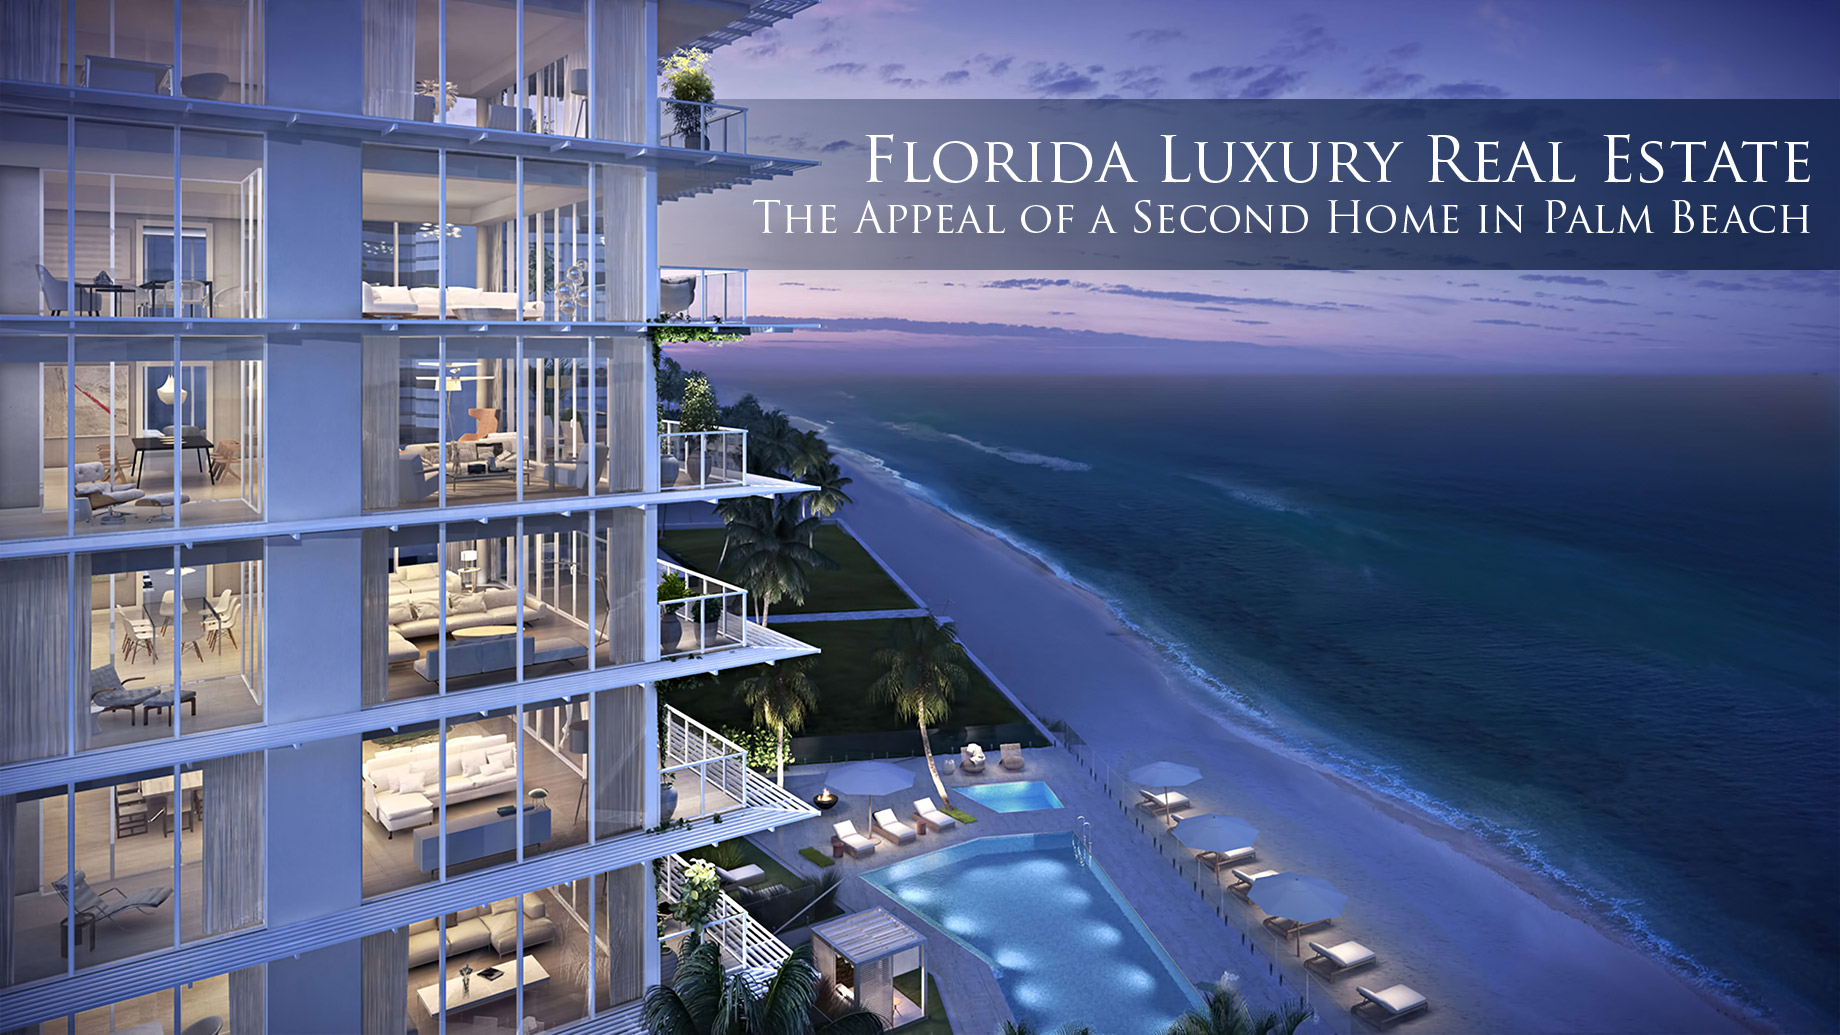 Florida Luxury Real Estate - The Appeal of a Second Home in Palm Beach